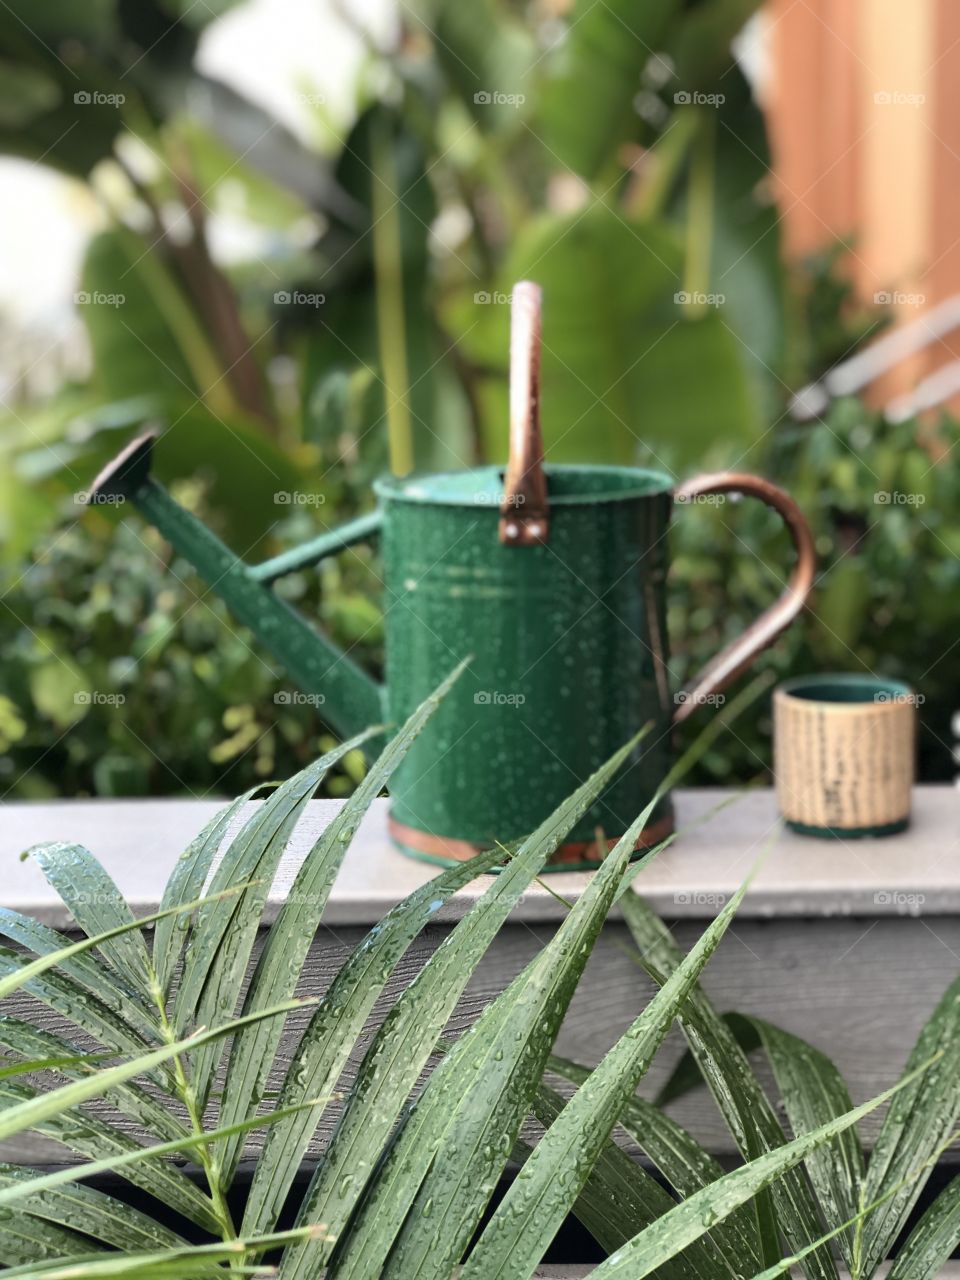 Watering can after fresh rain